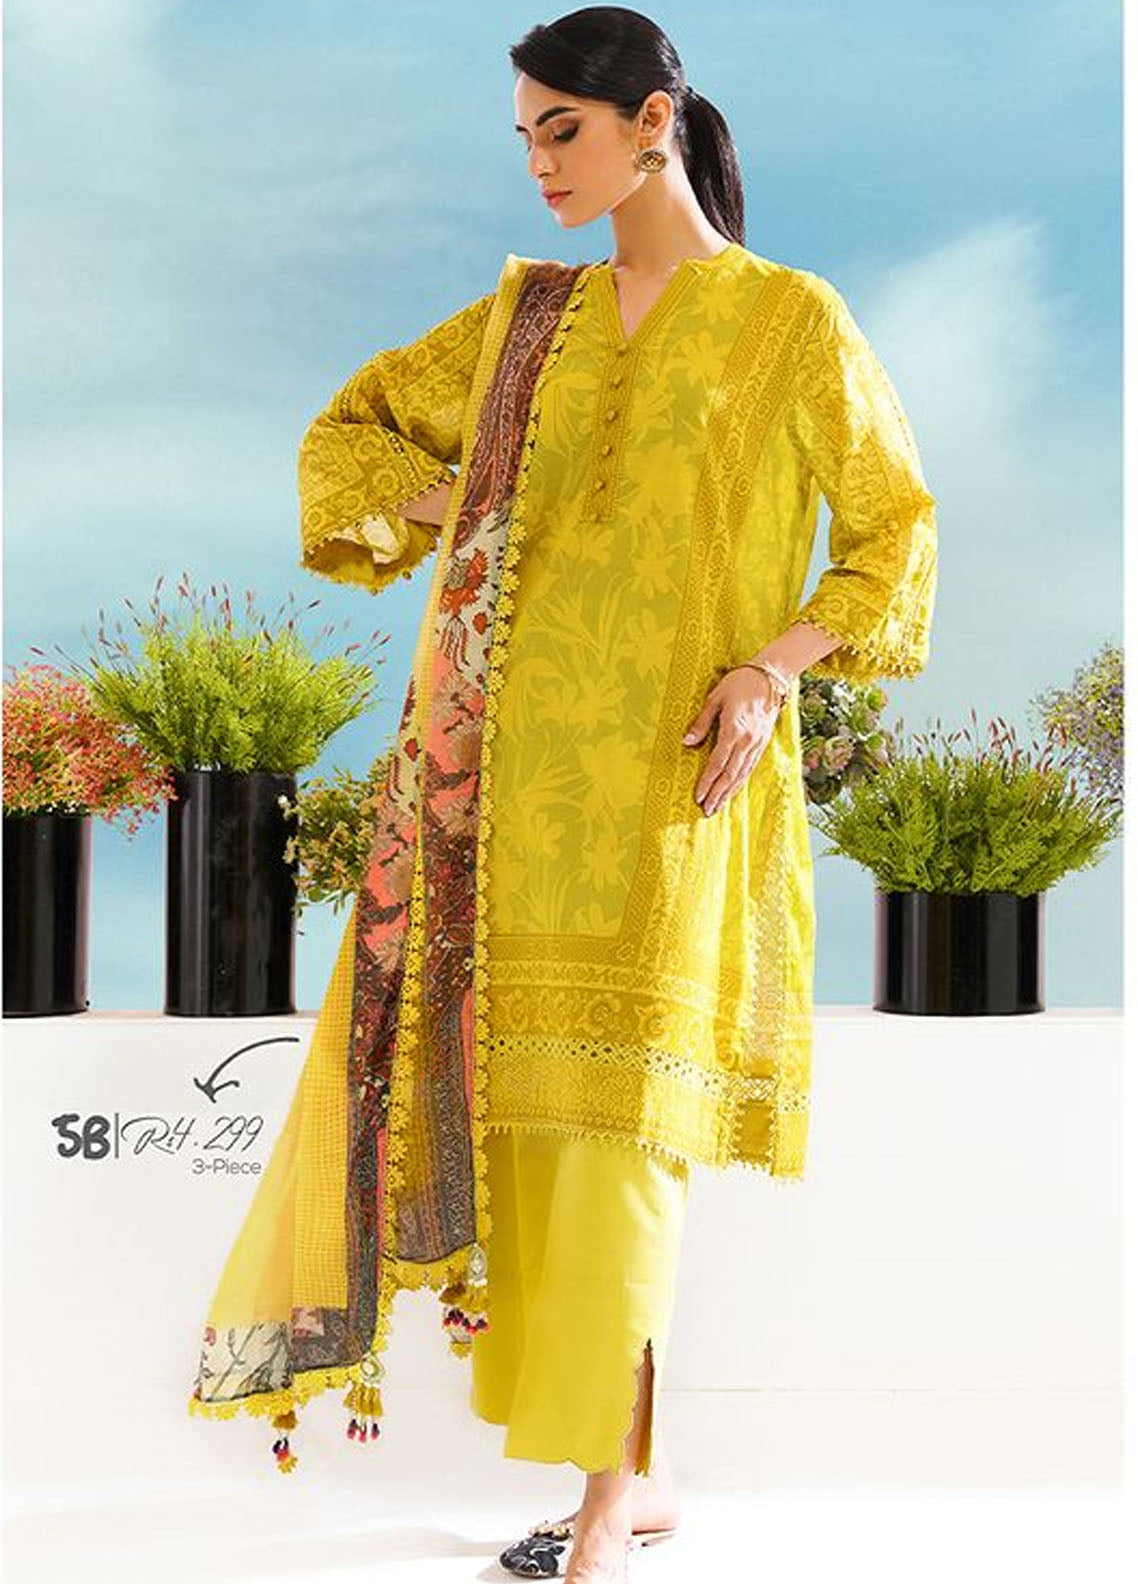 MAHAY by Sana Safinaz Summer Collection 2023 SS23MH D-5B